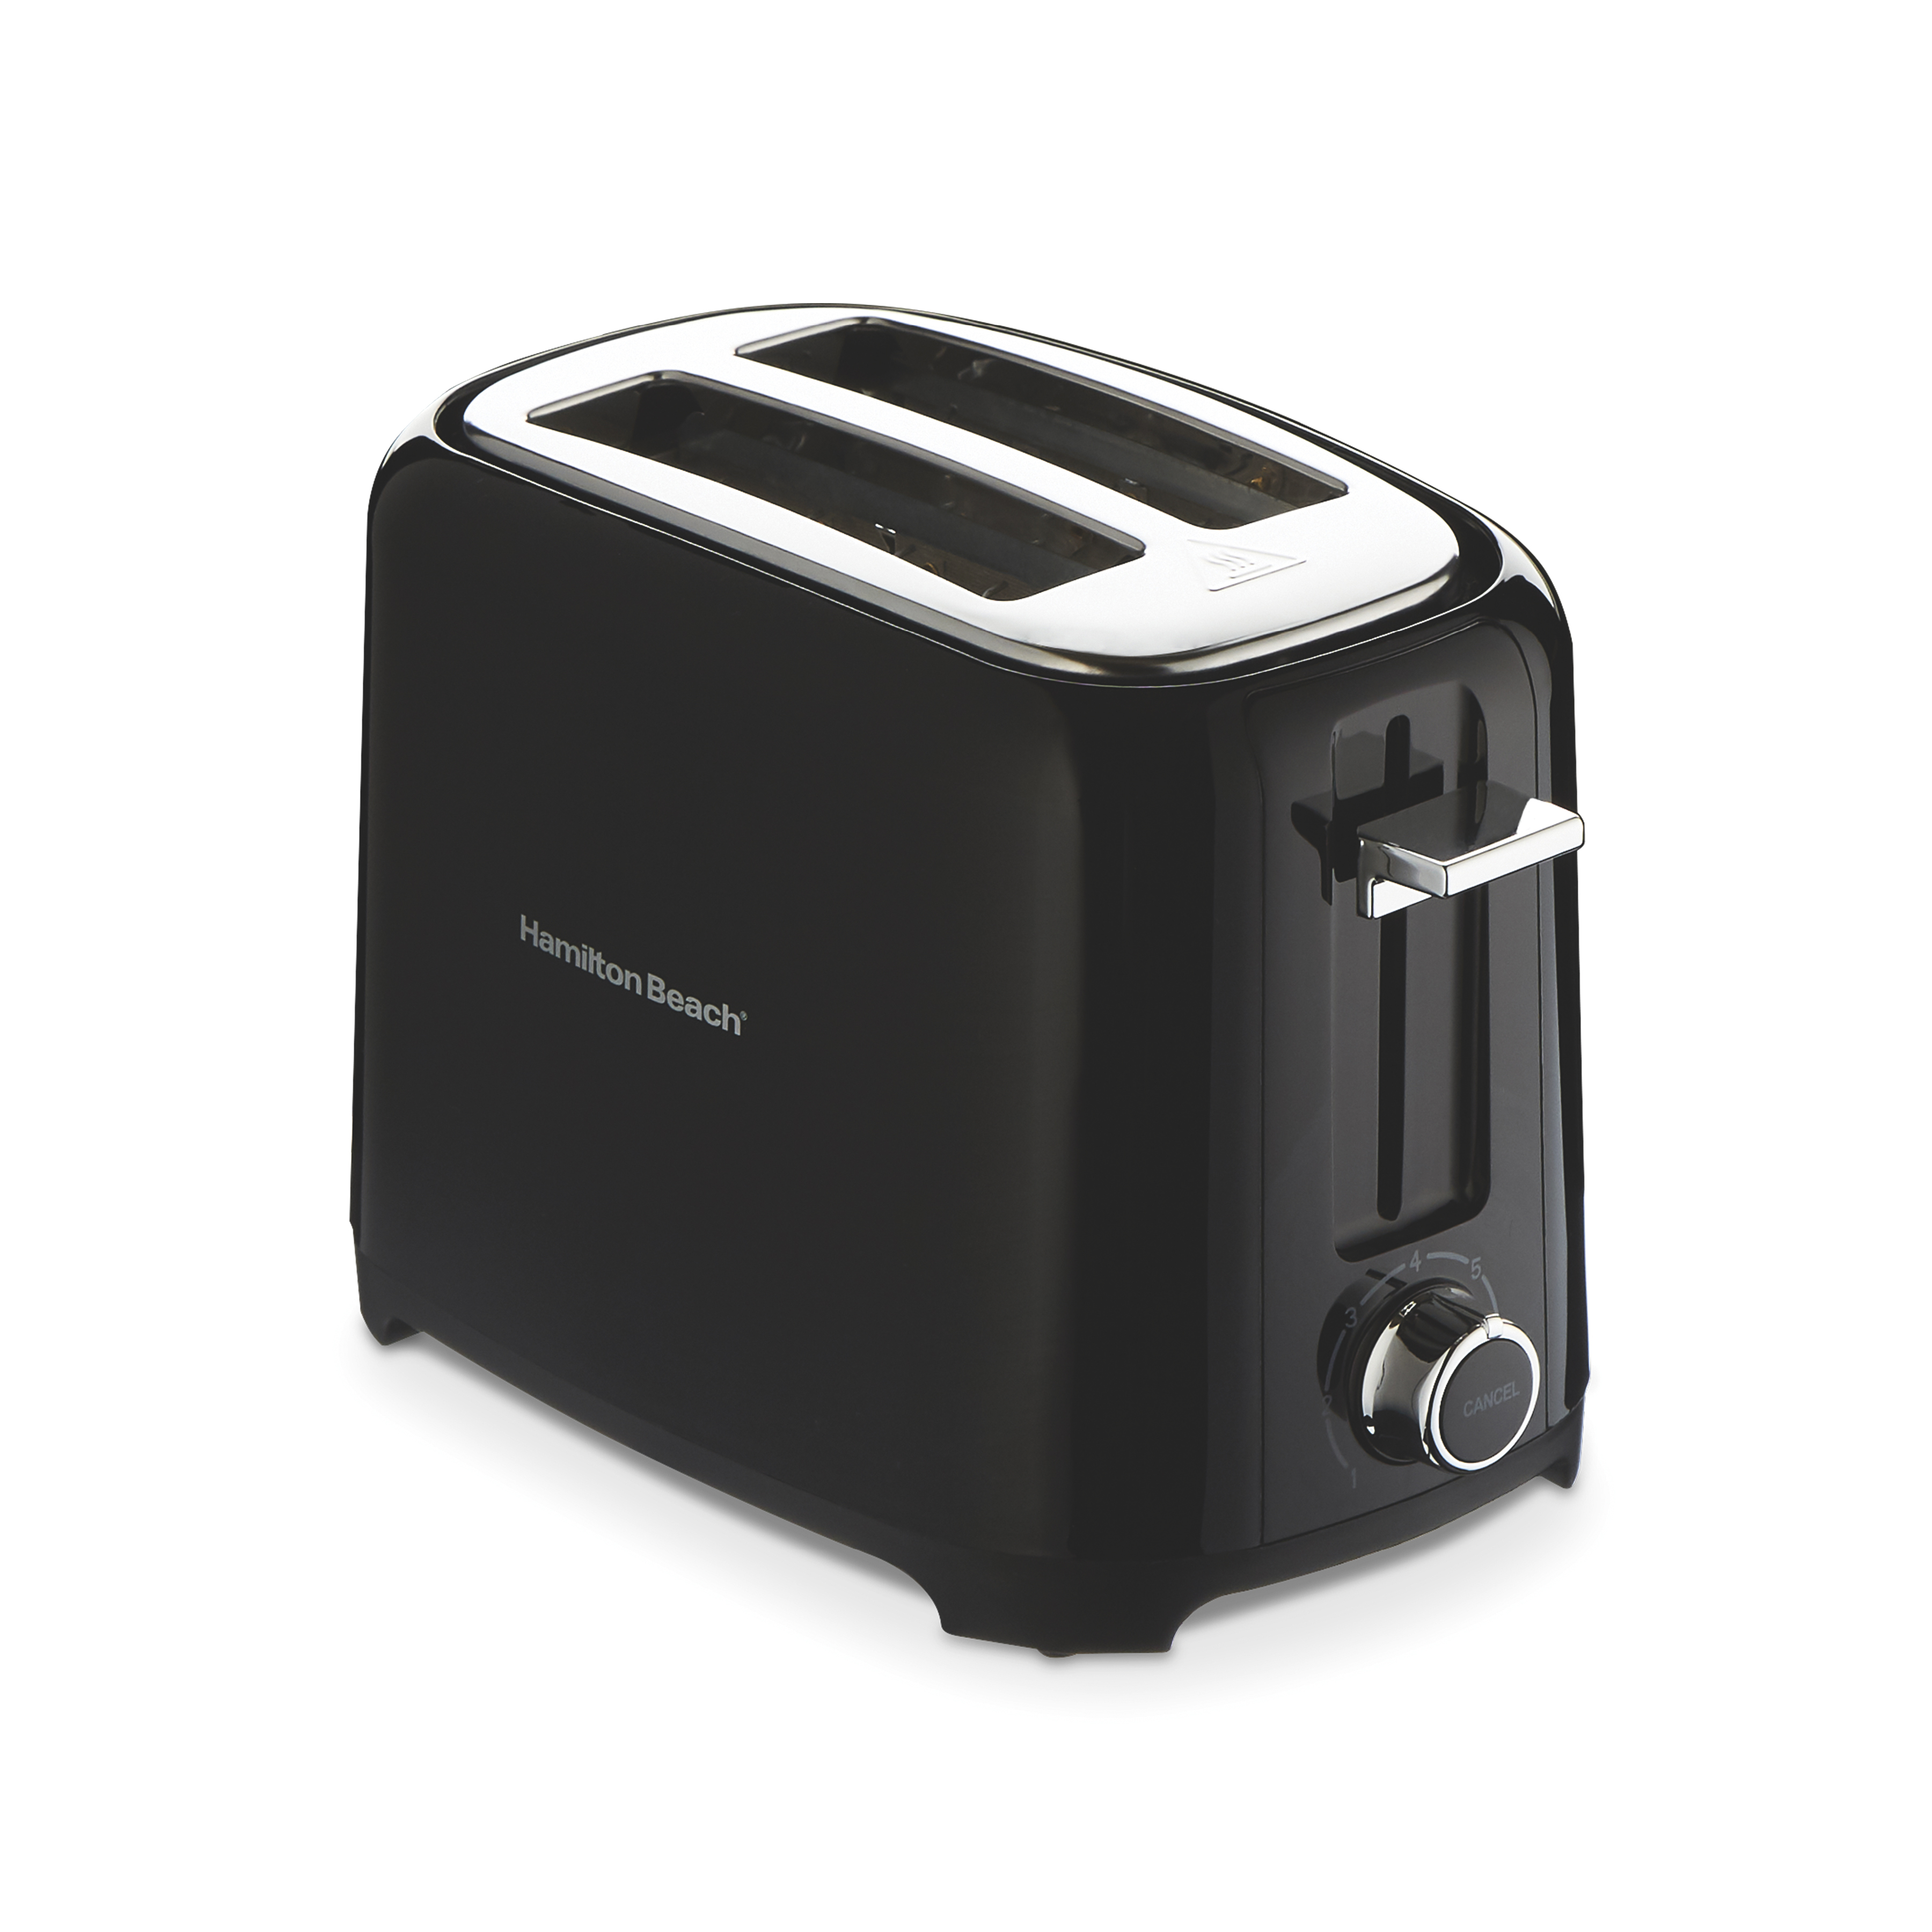 Hamilton Beach 2 Slice Toaster, Extra-Wide Slots, Chrome-Plated Lever, Black, 22217 - image 1 of 8